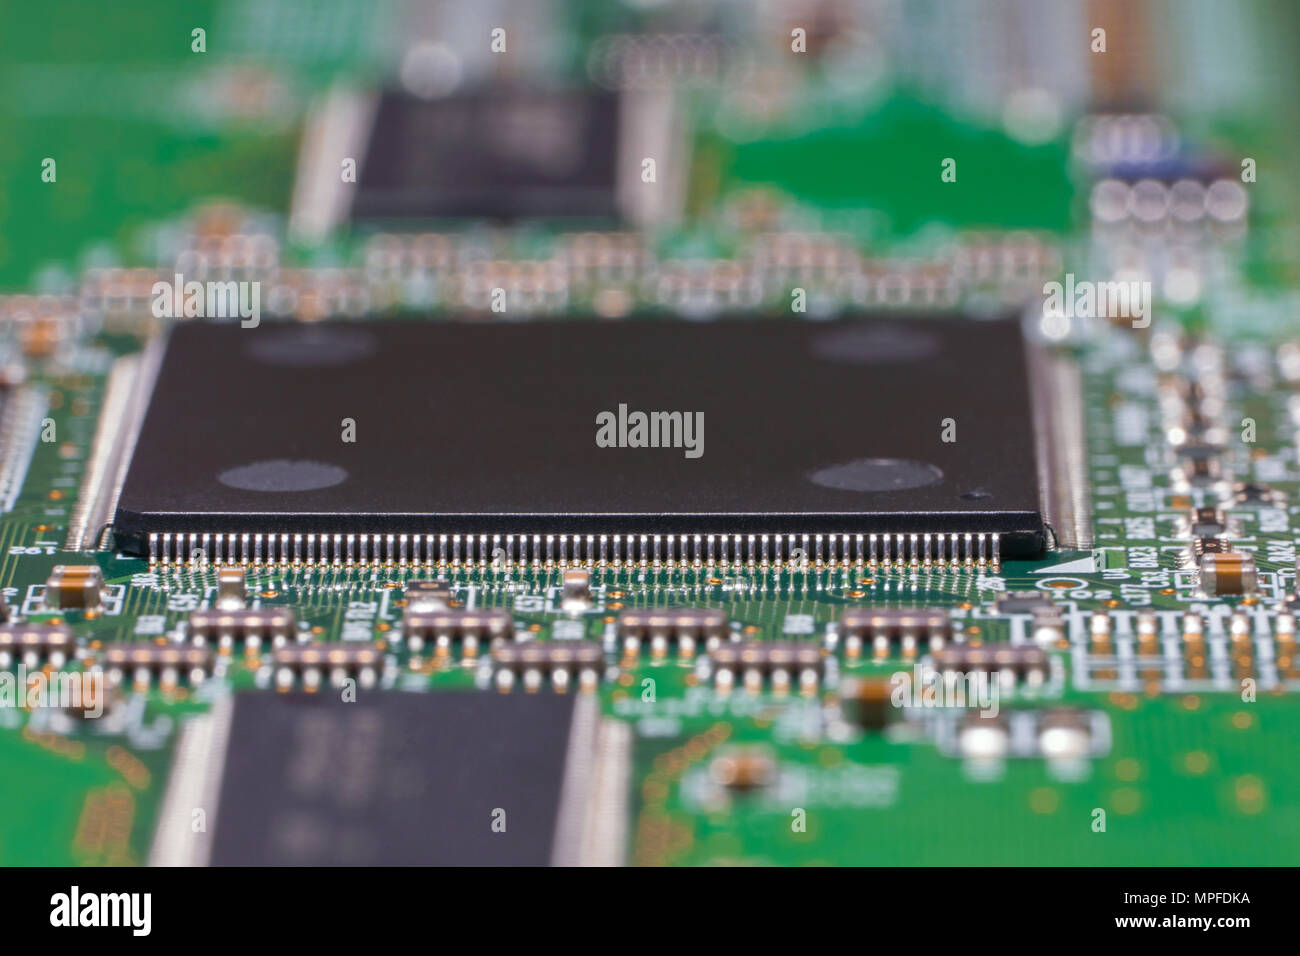 Printed circuit board with chips and SMD components. Macro photography of a fragment of a circuit Board of the electronic device Stock Photo